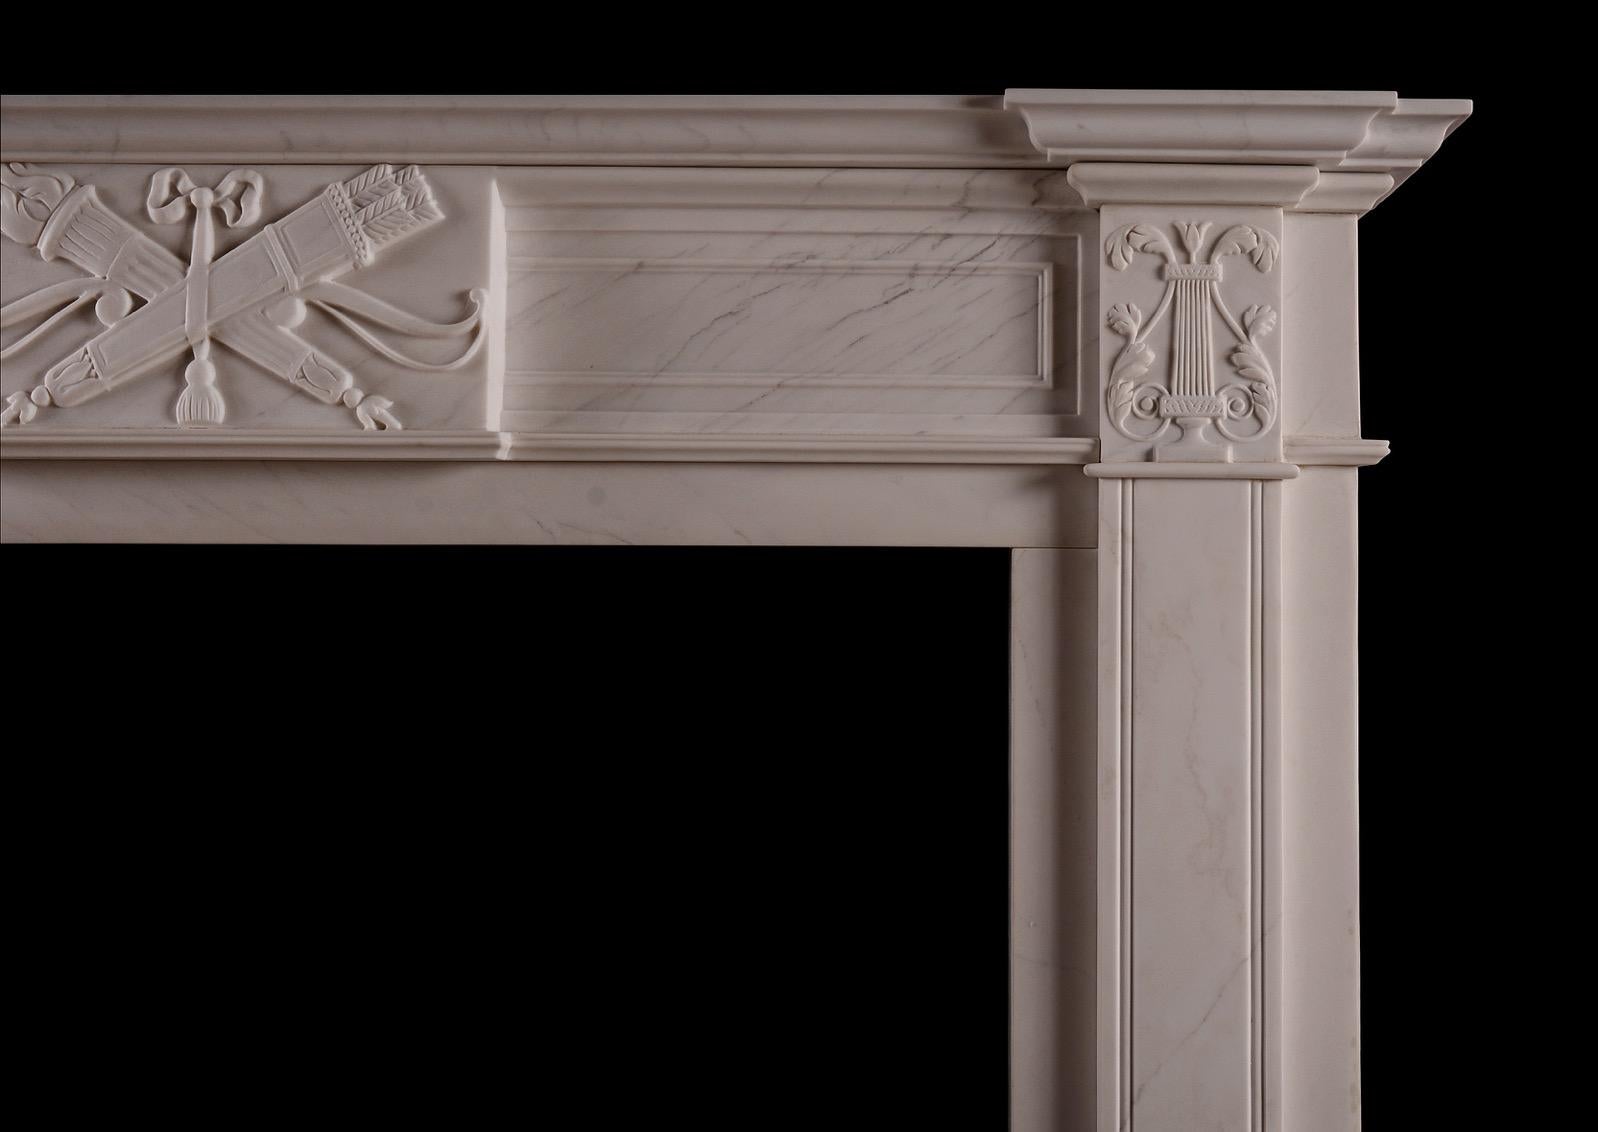 A white marble fireplace in the late Georgian style. The frieze with carved centre blocking featuring quiver, torch and tied ribbon, with carved lyres to end blocks. Panelled frieze and jambs, and breakfront moulded shelf above. Based on an original